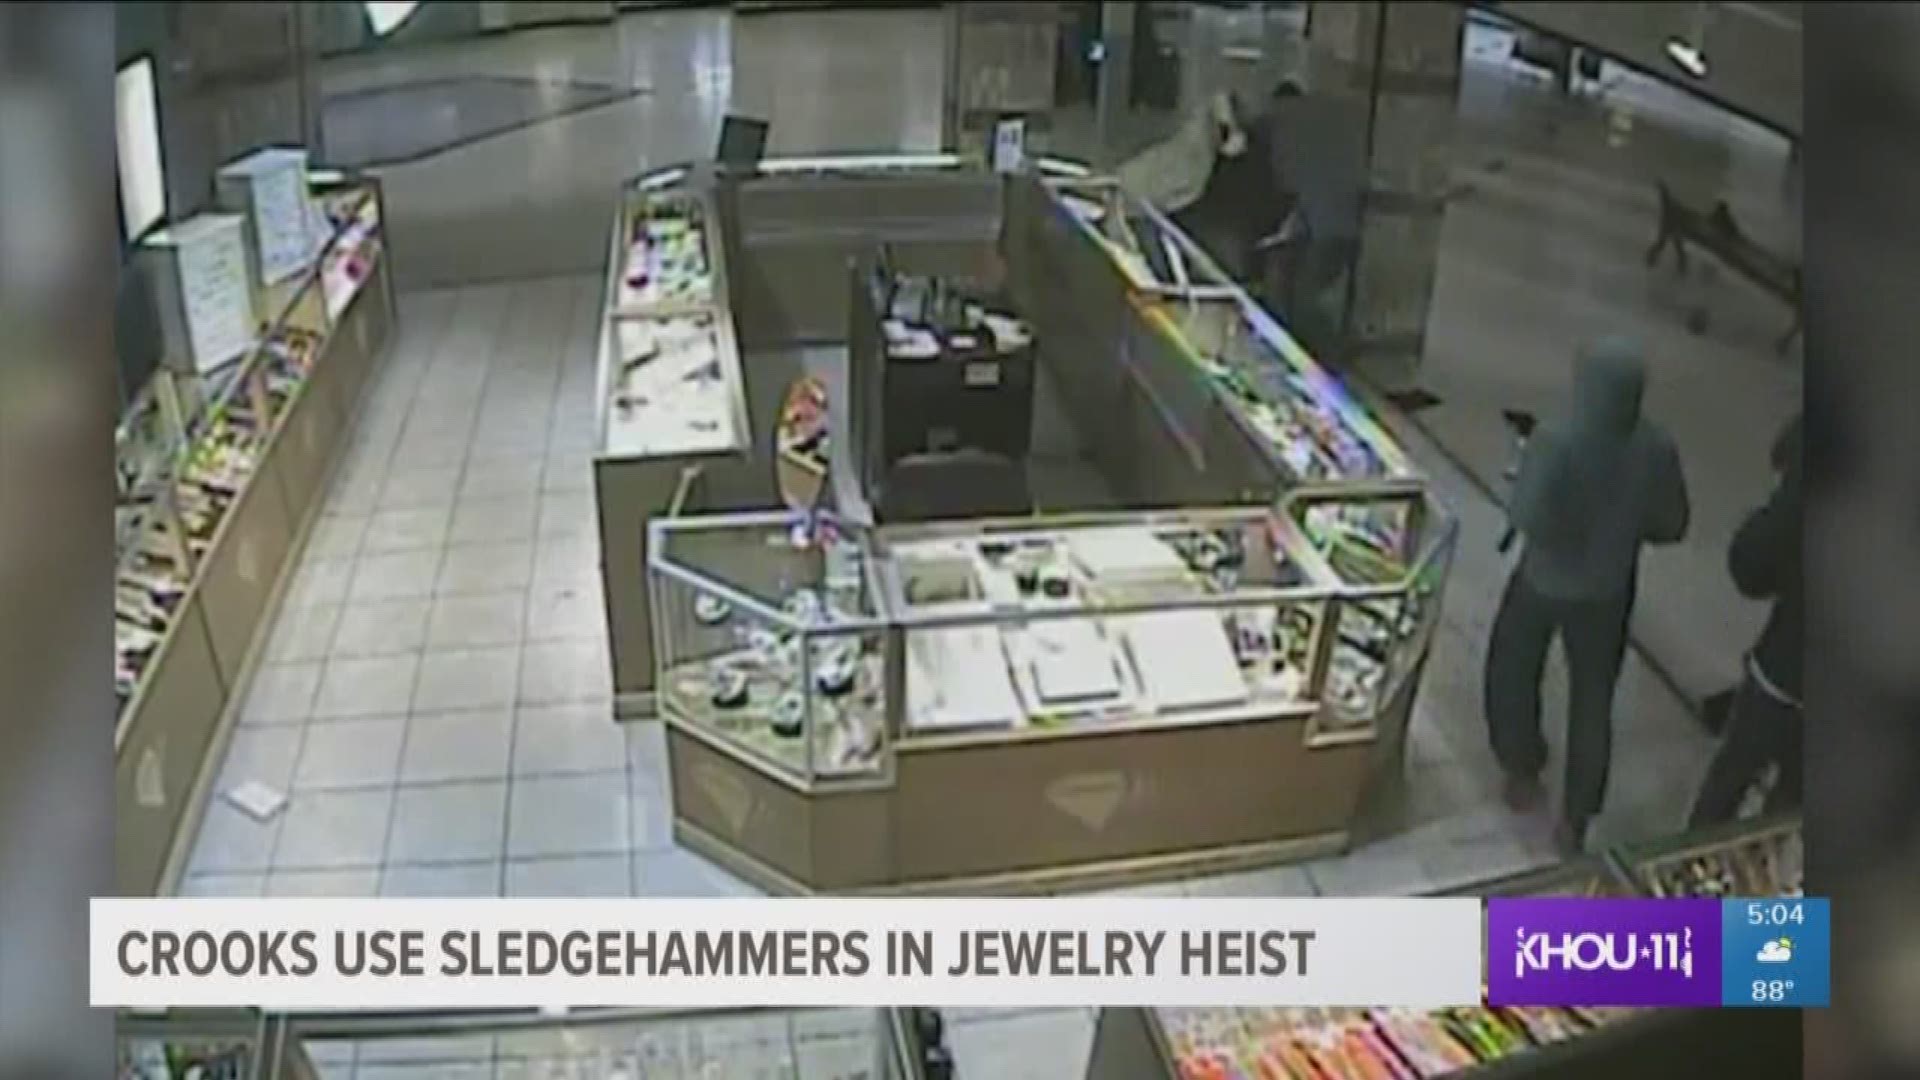 Houston Police are looking for four suspects caught on camera robbing a southwest Houston jewelry store with sledgehammers and assaulting one of the employees.